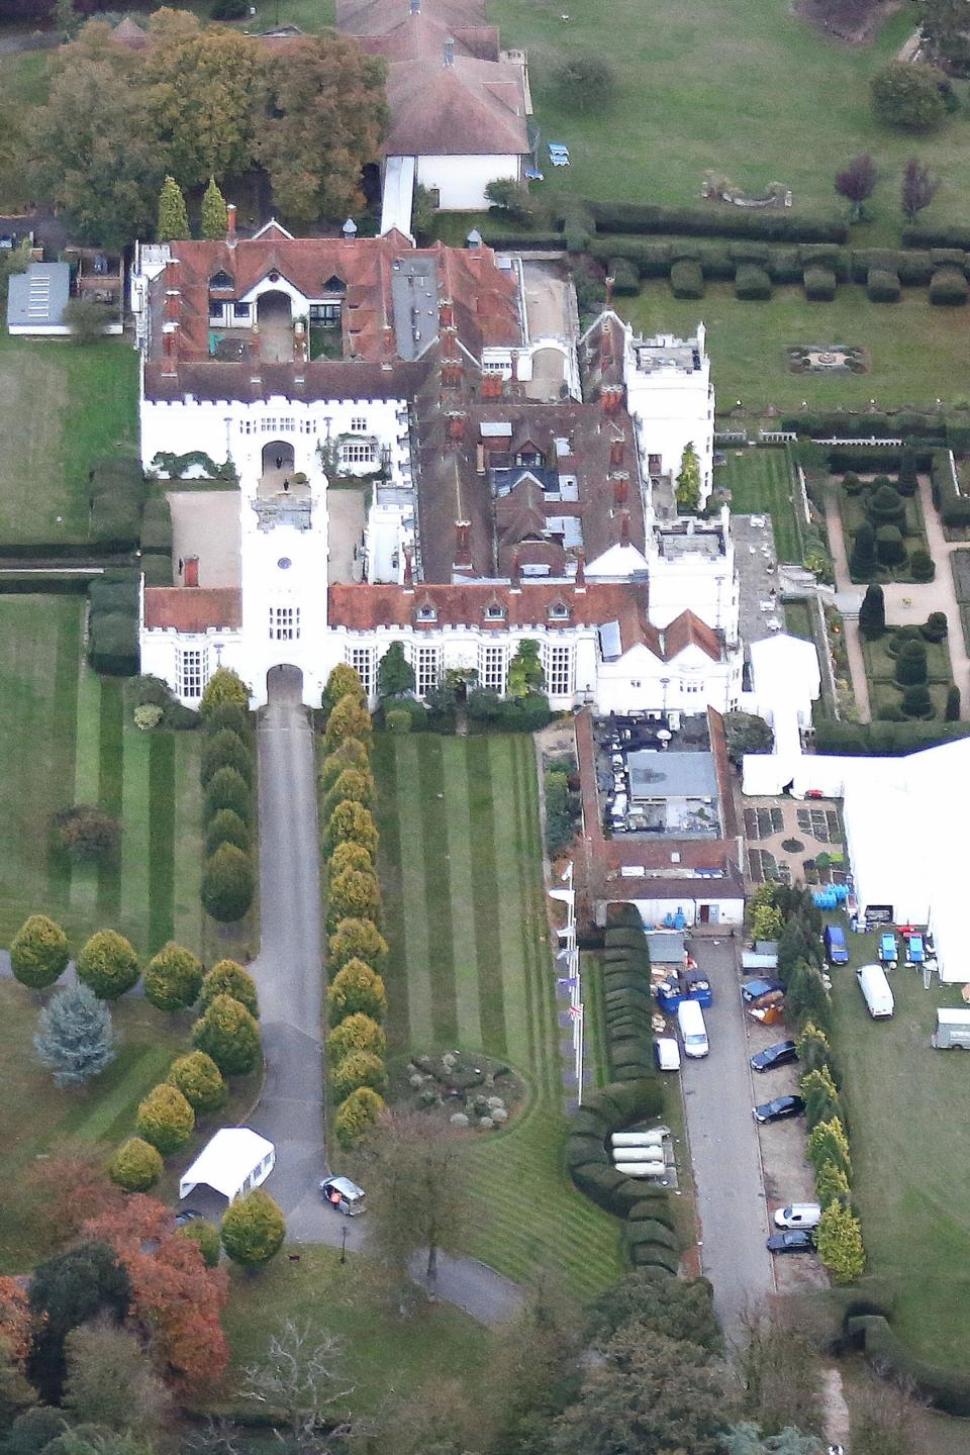 Guests begin arriving at the Danesfield House outside London for a wedding party thrown by Amal Alamuddin’s parents to celebrate her marriage to actor George Clooney.